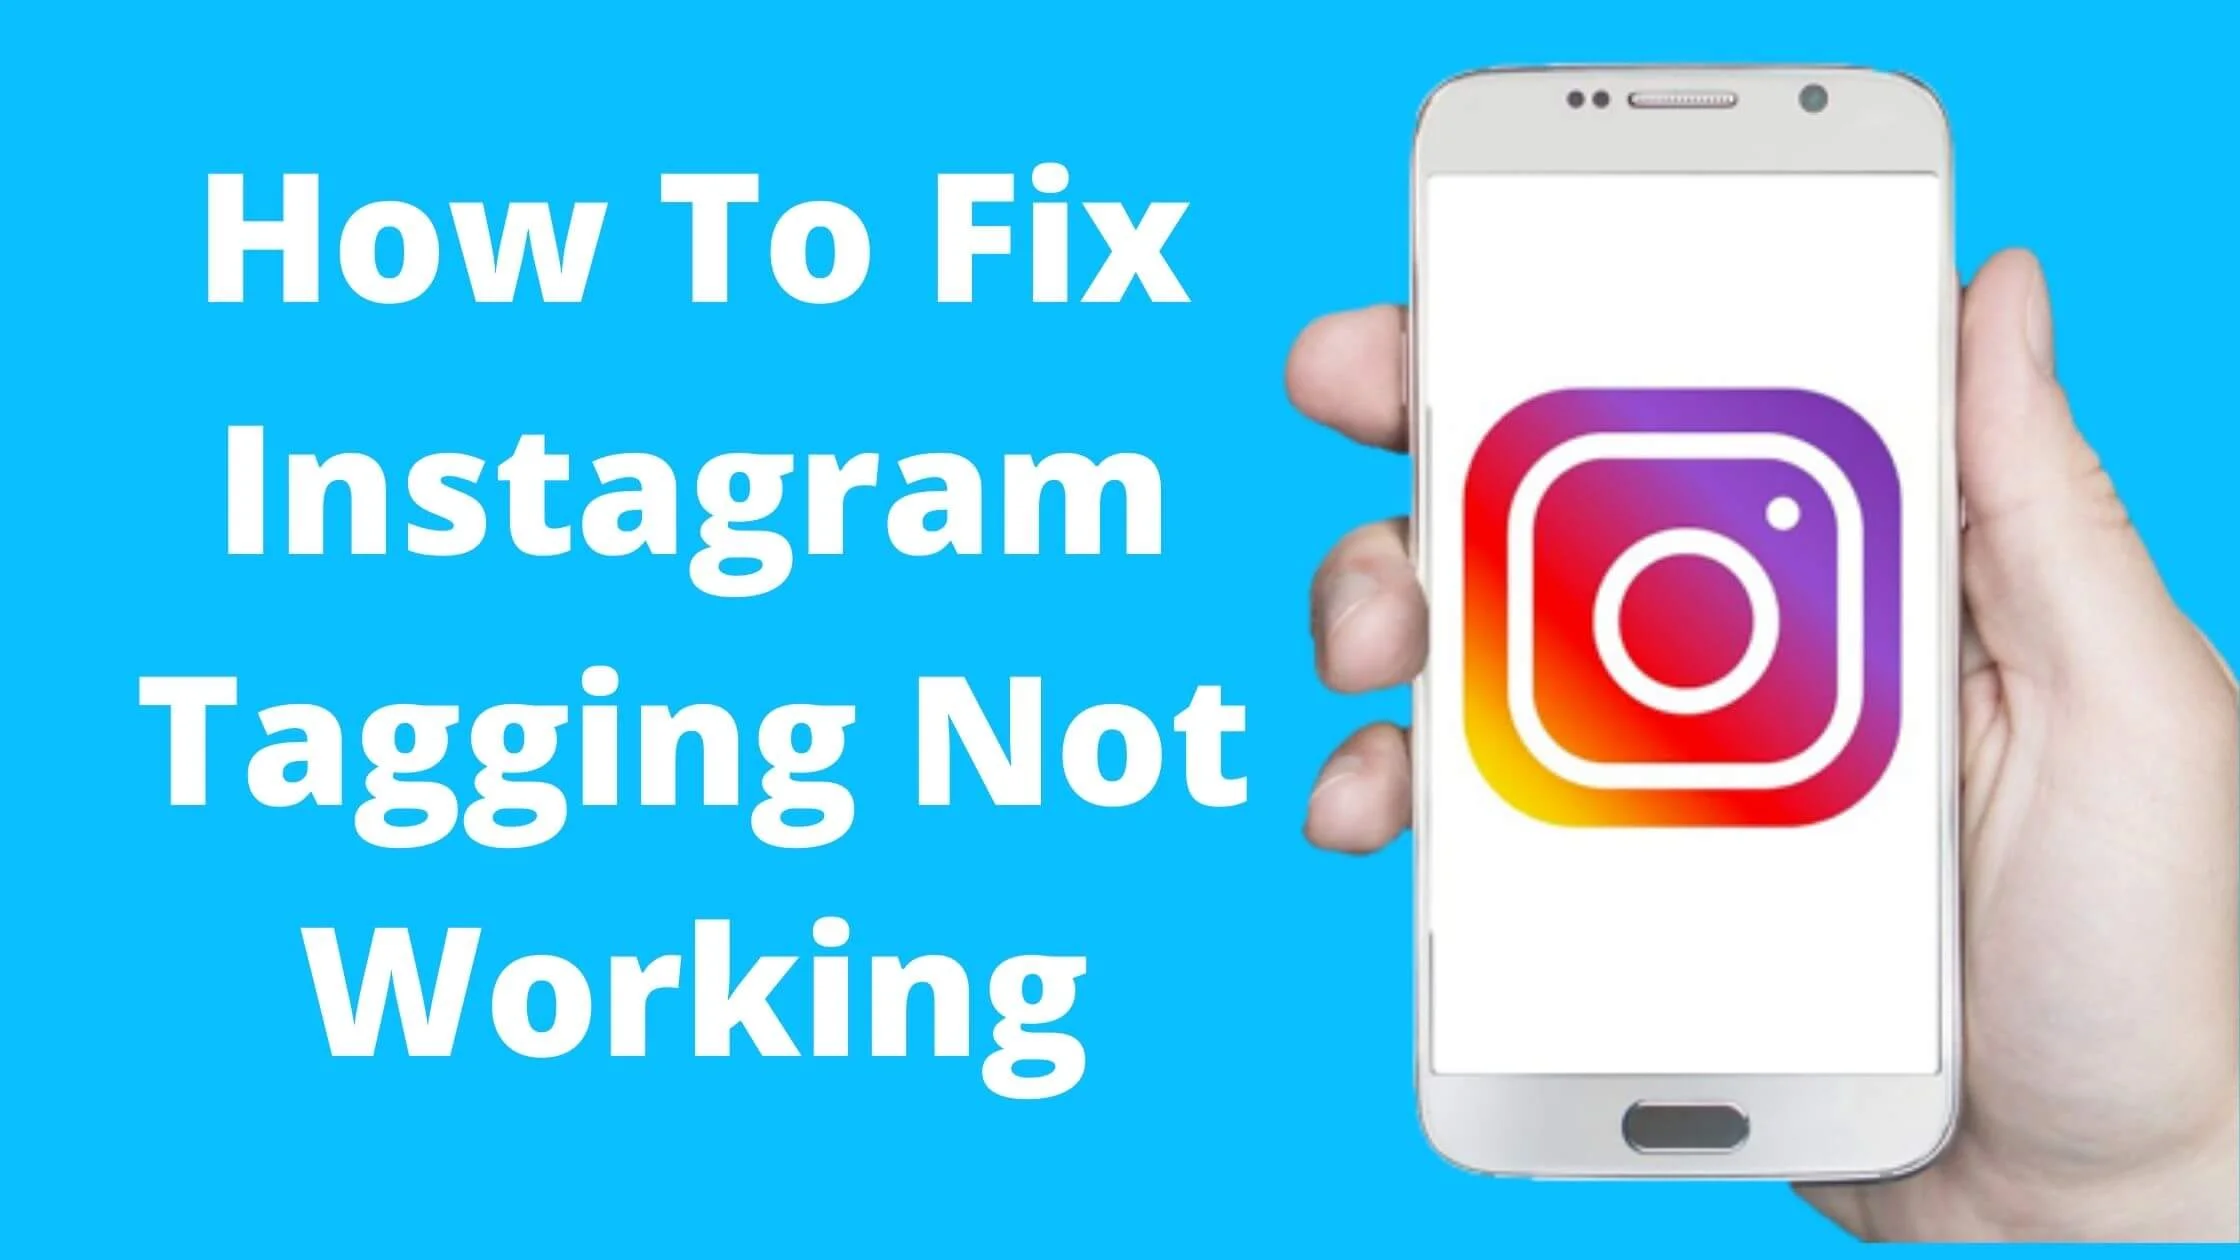 How To Fix Instagram Tagging Not Working